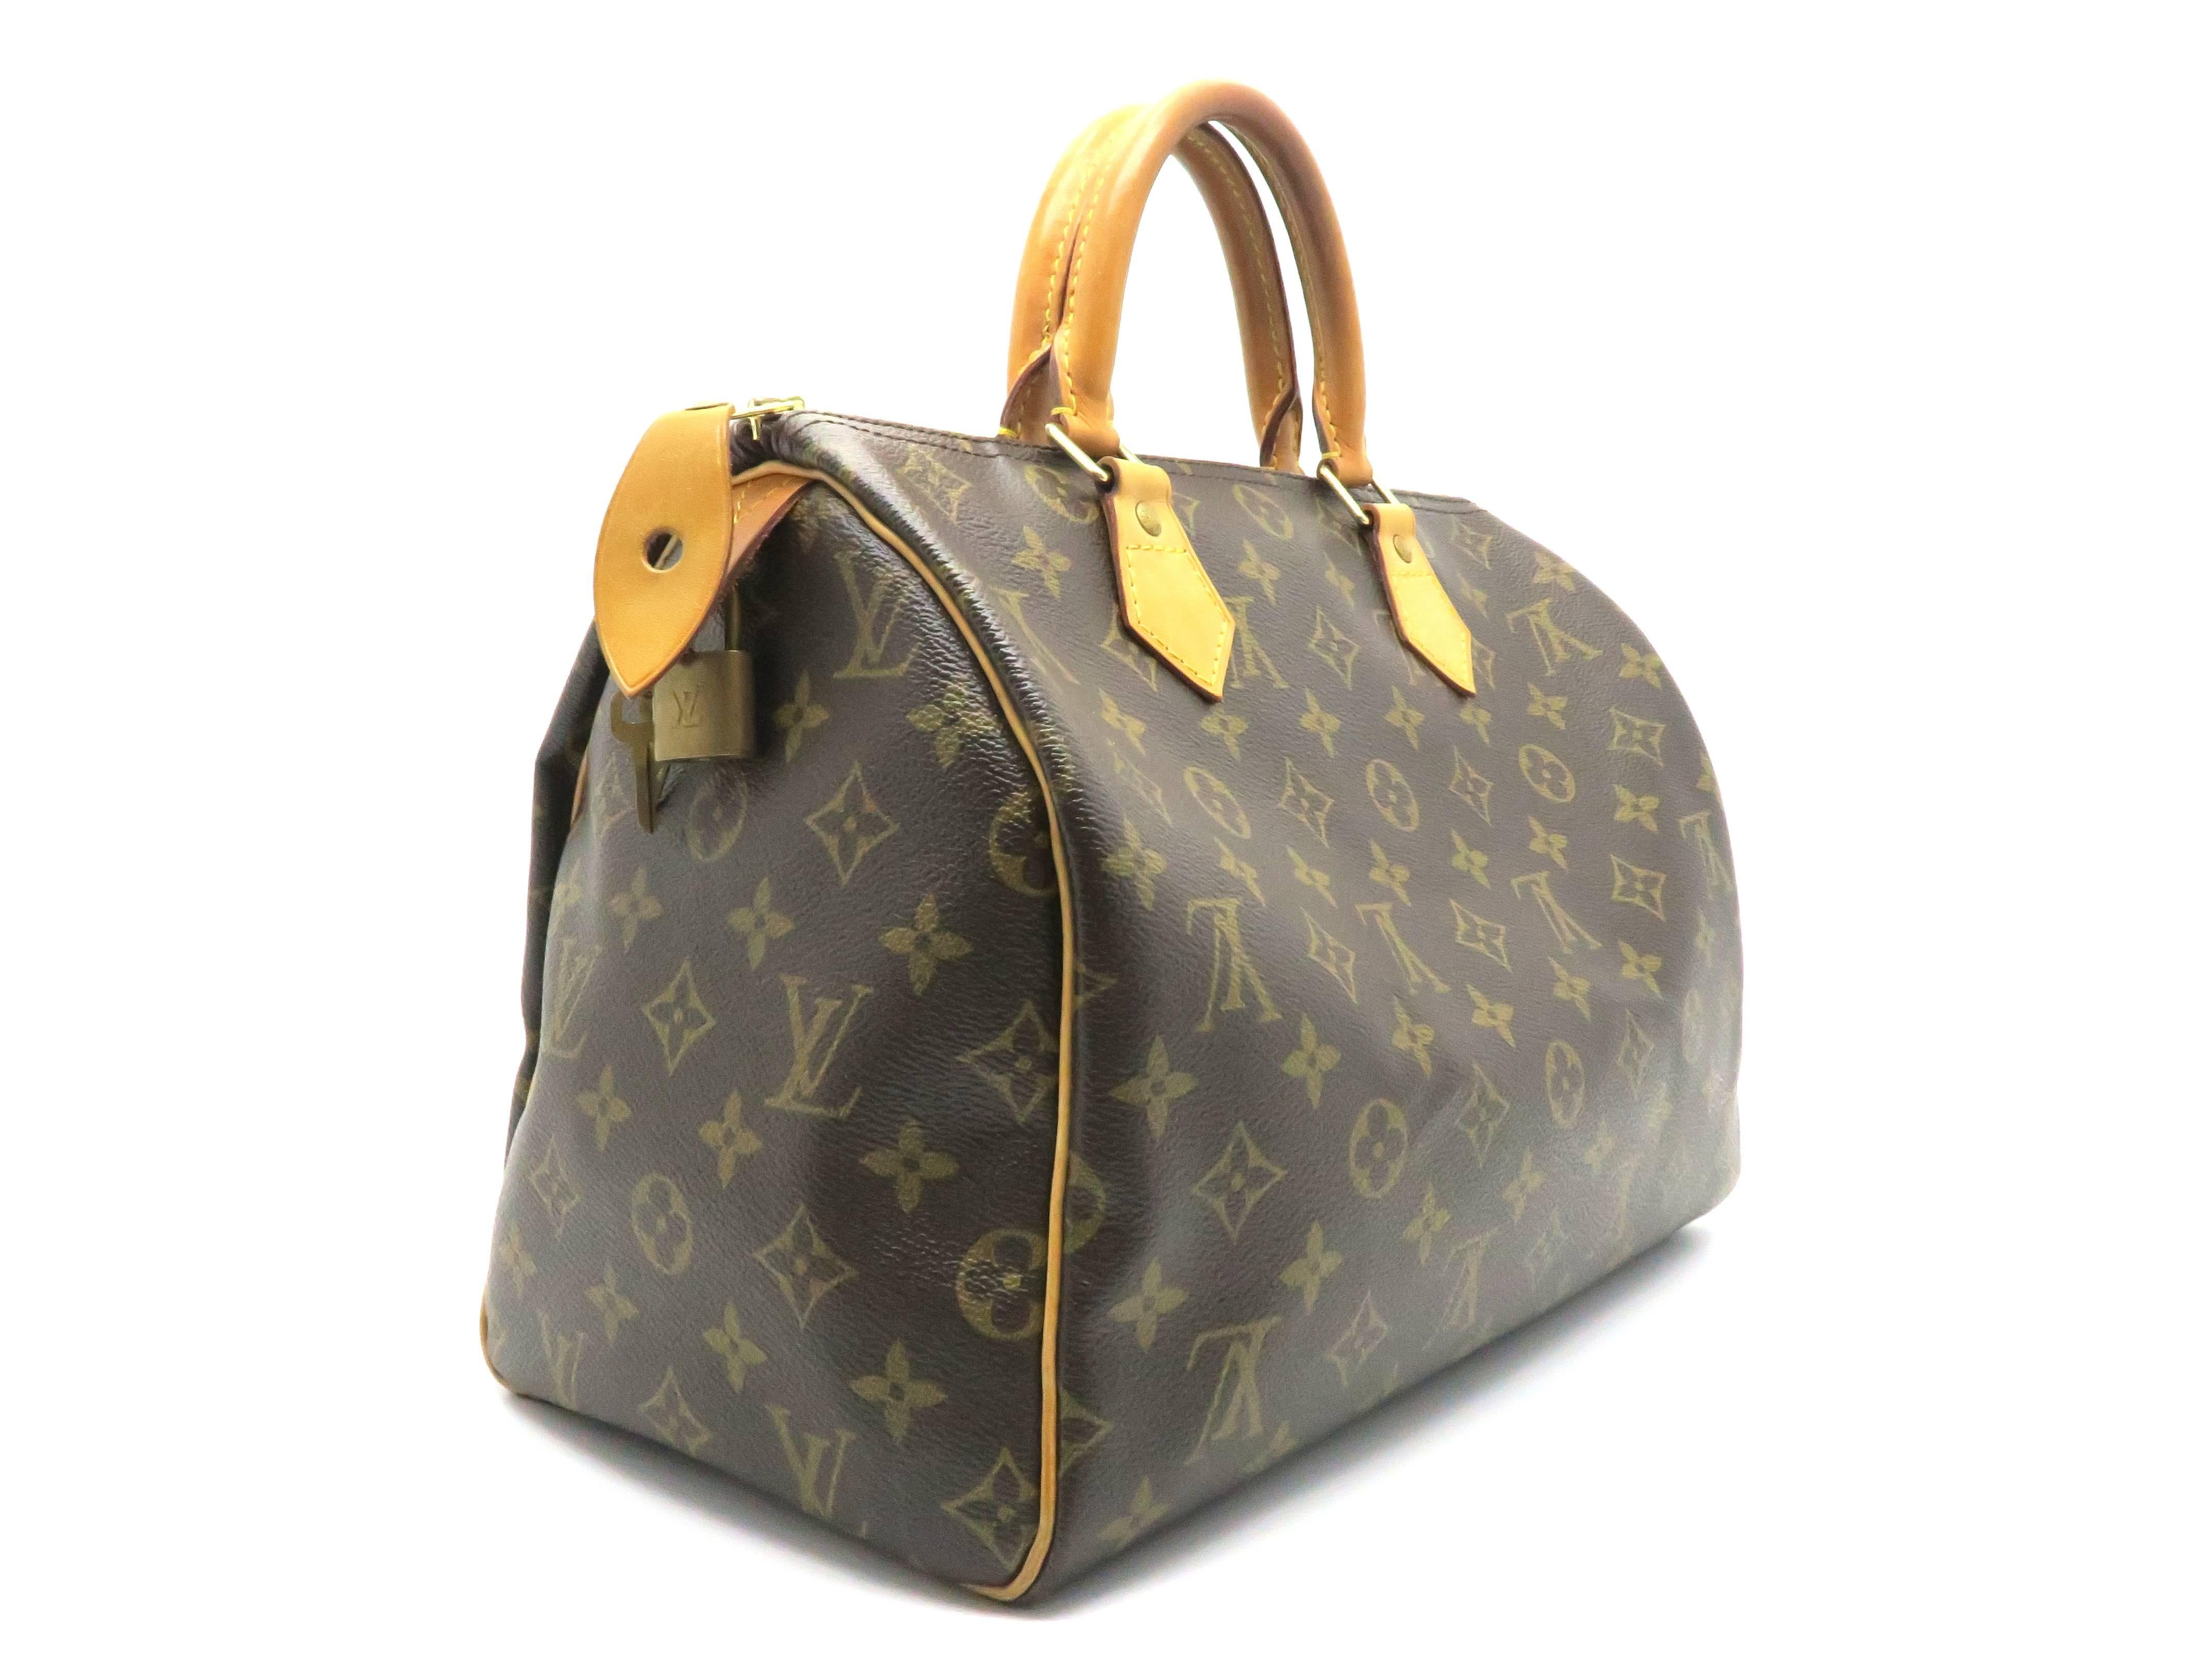 Color: Brown 

Material: Monogram Canvas

Condition: Rank A 
Overall: Good, few minor defects
Surface: Good
Corners: Good
Edges: Good
Handles/Straps: Minor Scratches and Stains
Hardware: Minor Stains

Dimension: W30 × H21 × D17cm（W11.8" ×